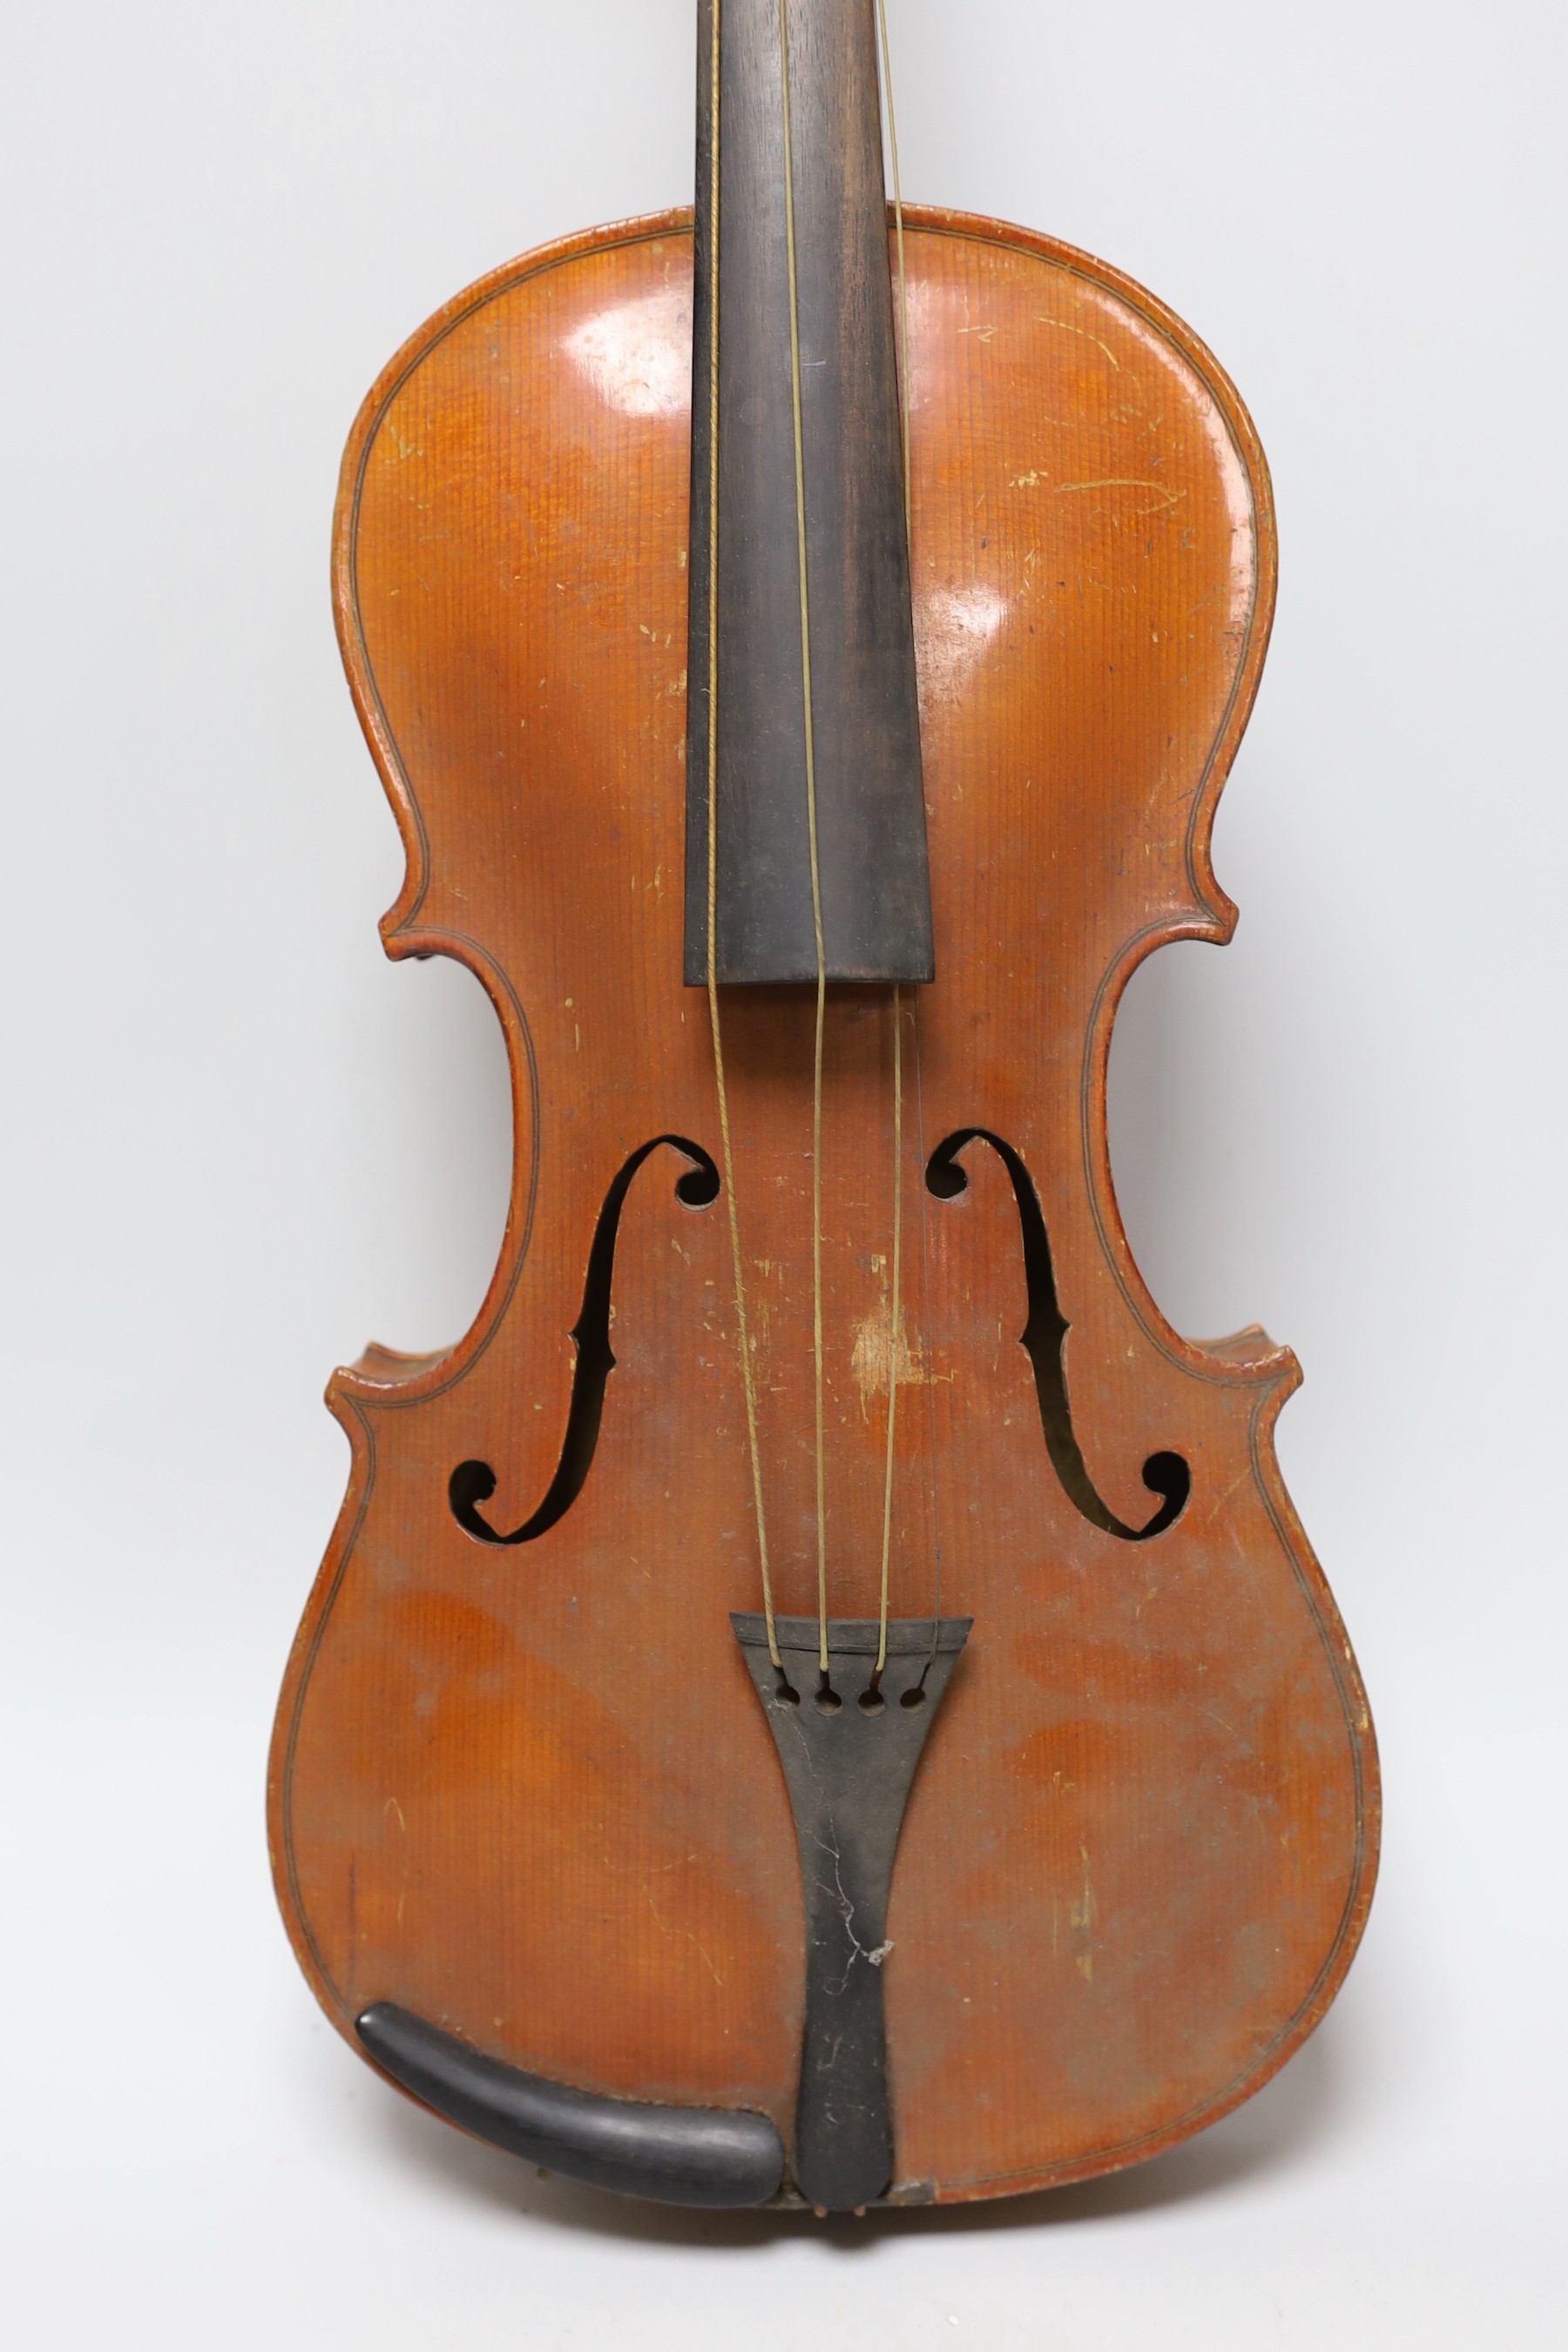 An early 20th century Stainer violin, patent number 23140, back measures 36.5cm excl button. cased